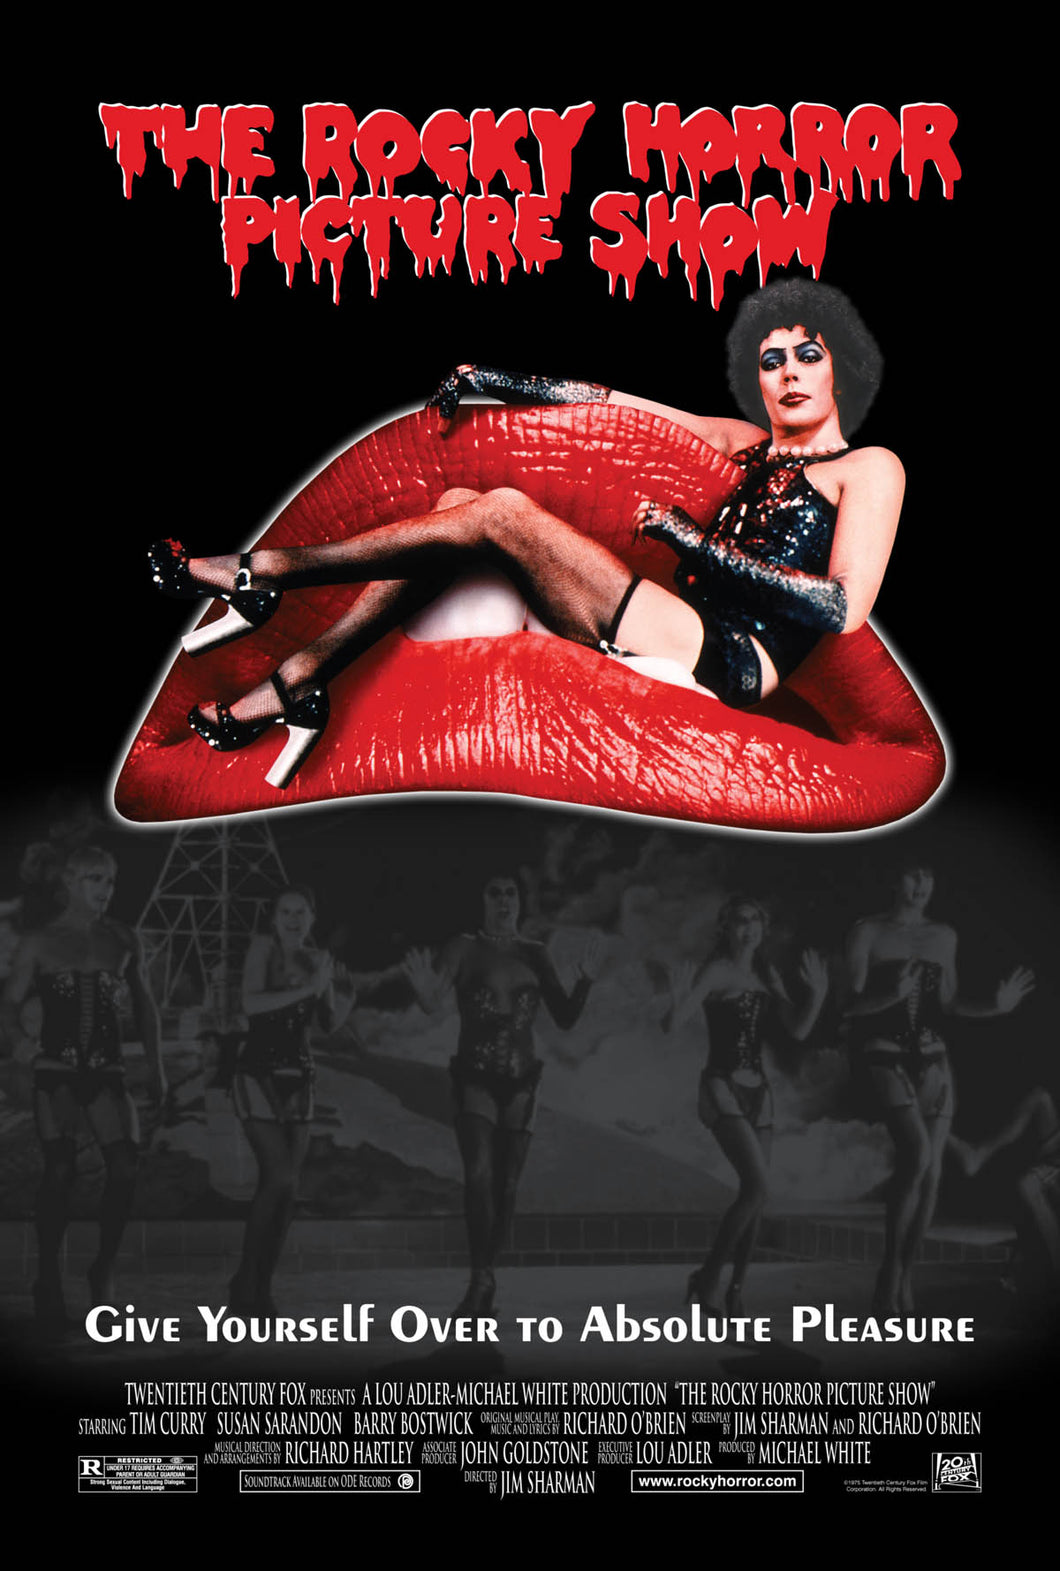 Tim Curry & Susan Sarandon dual signed The Rocky Horror Picture Show Poster Photo #5 (8x10 or 11x17) Pre-Order